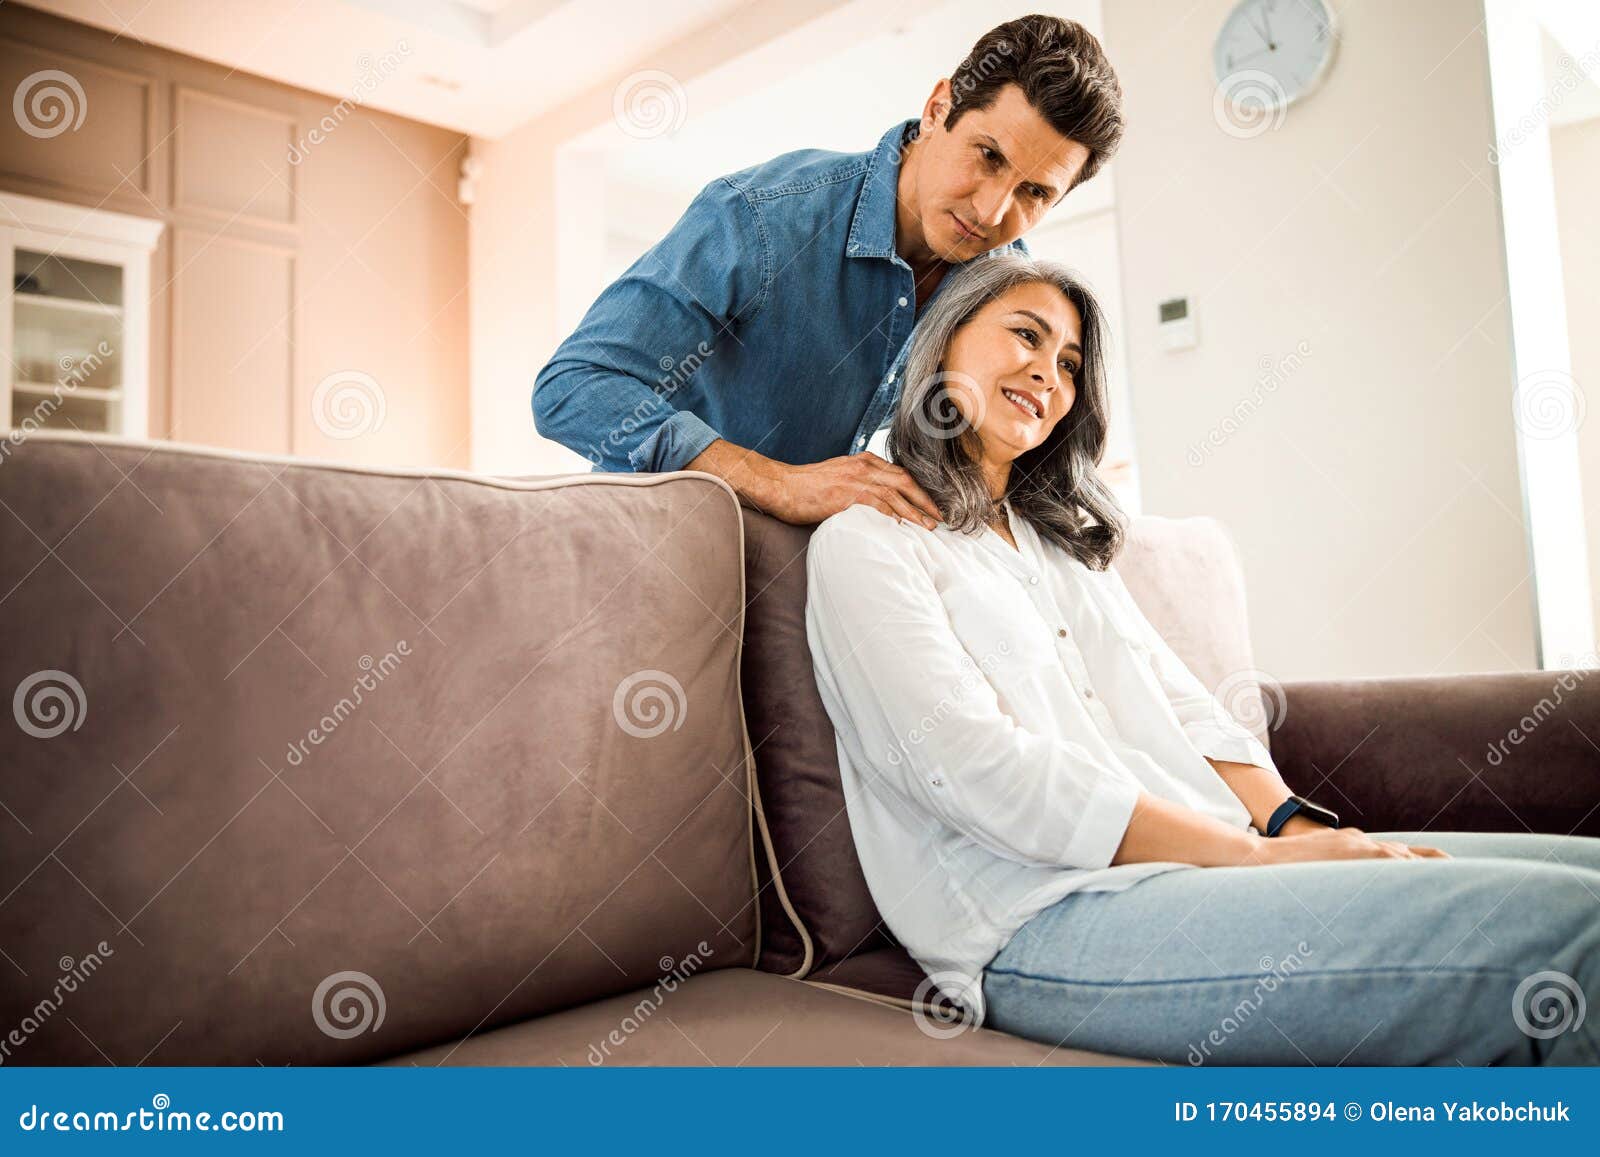 Smiling Mature Husband Doing Massage To Her Pretty Wife Stock Photo - Image...